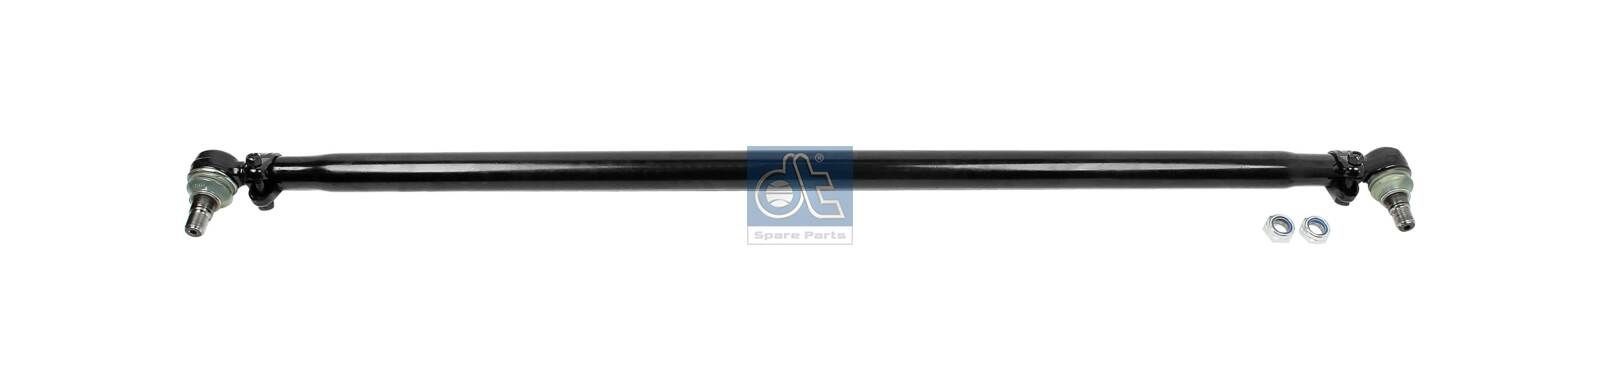 DT Spare Parts 3.63029 Rod Assembly 81.46610.6579